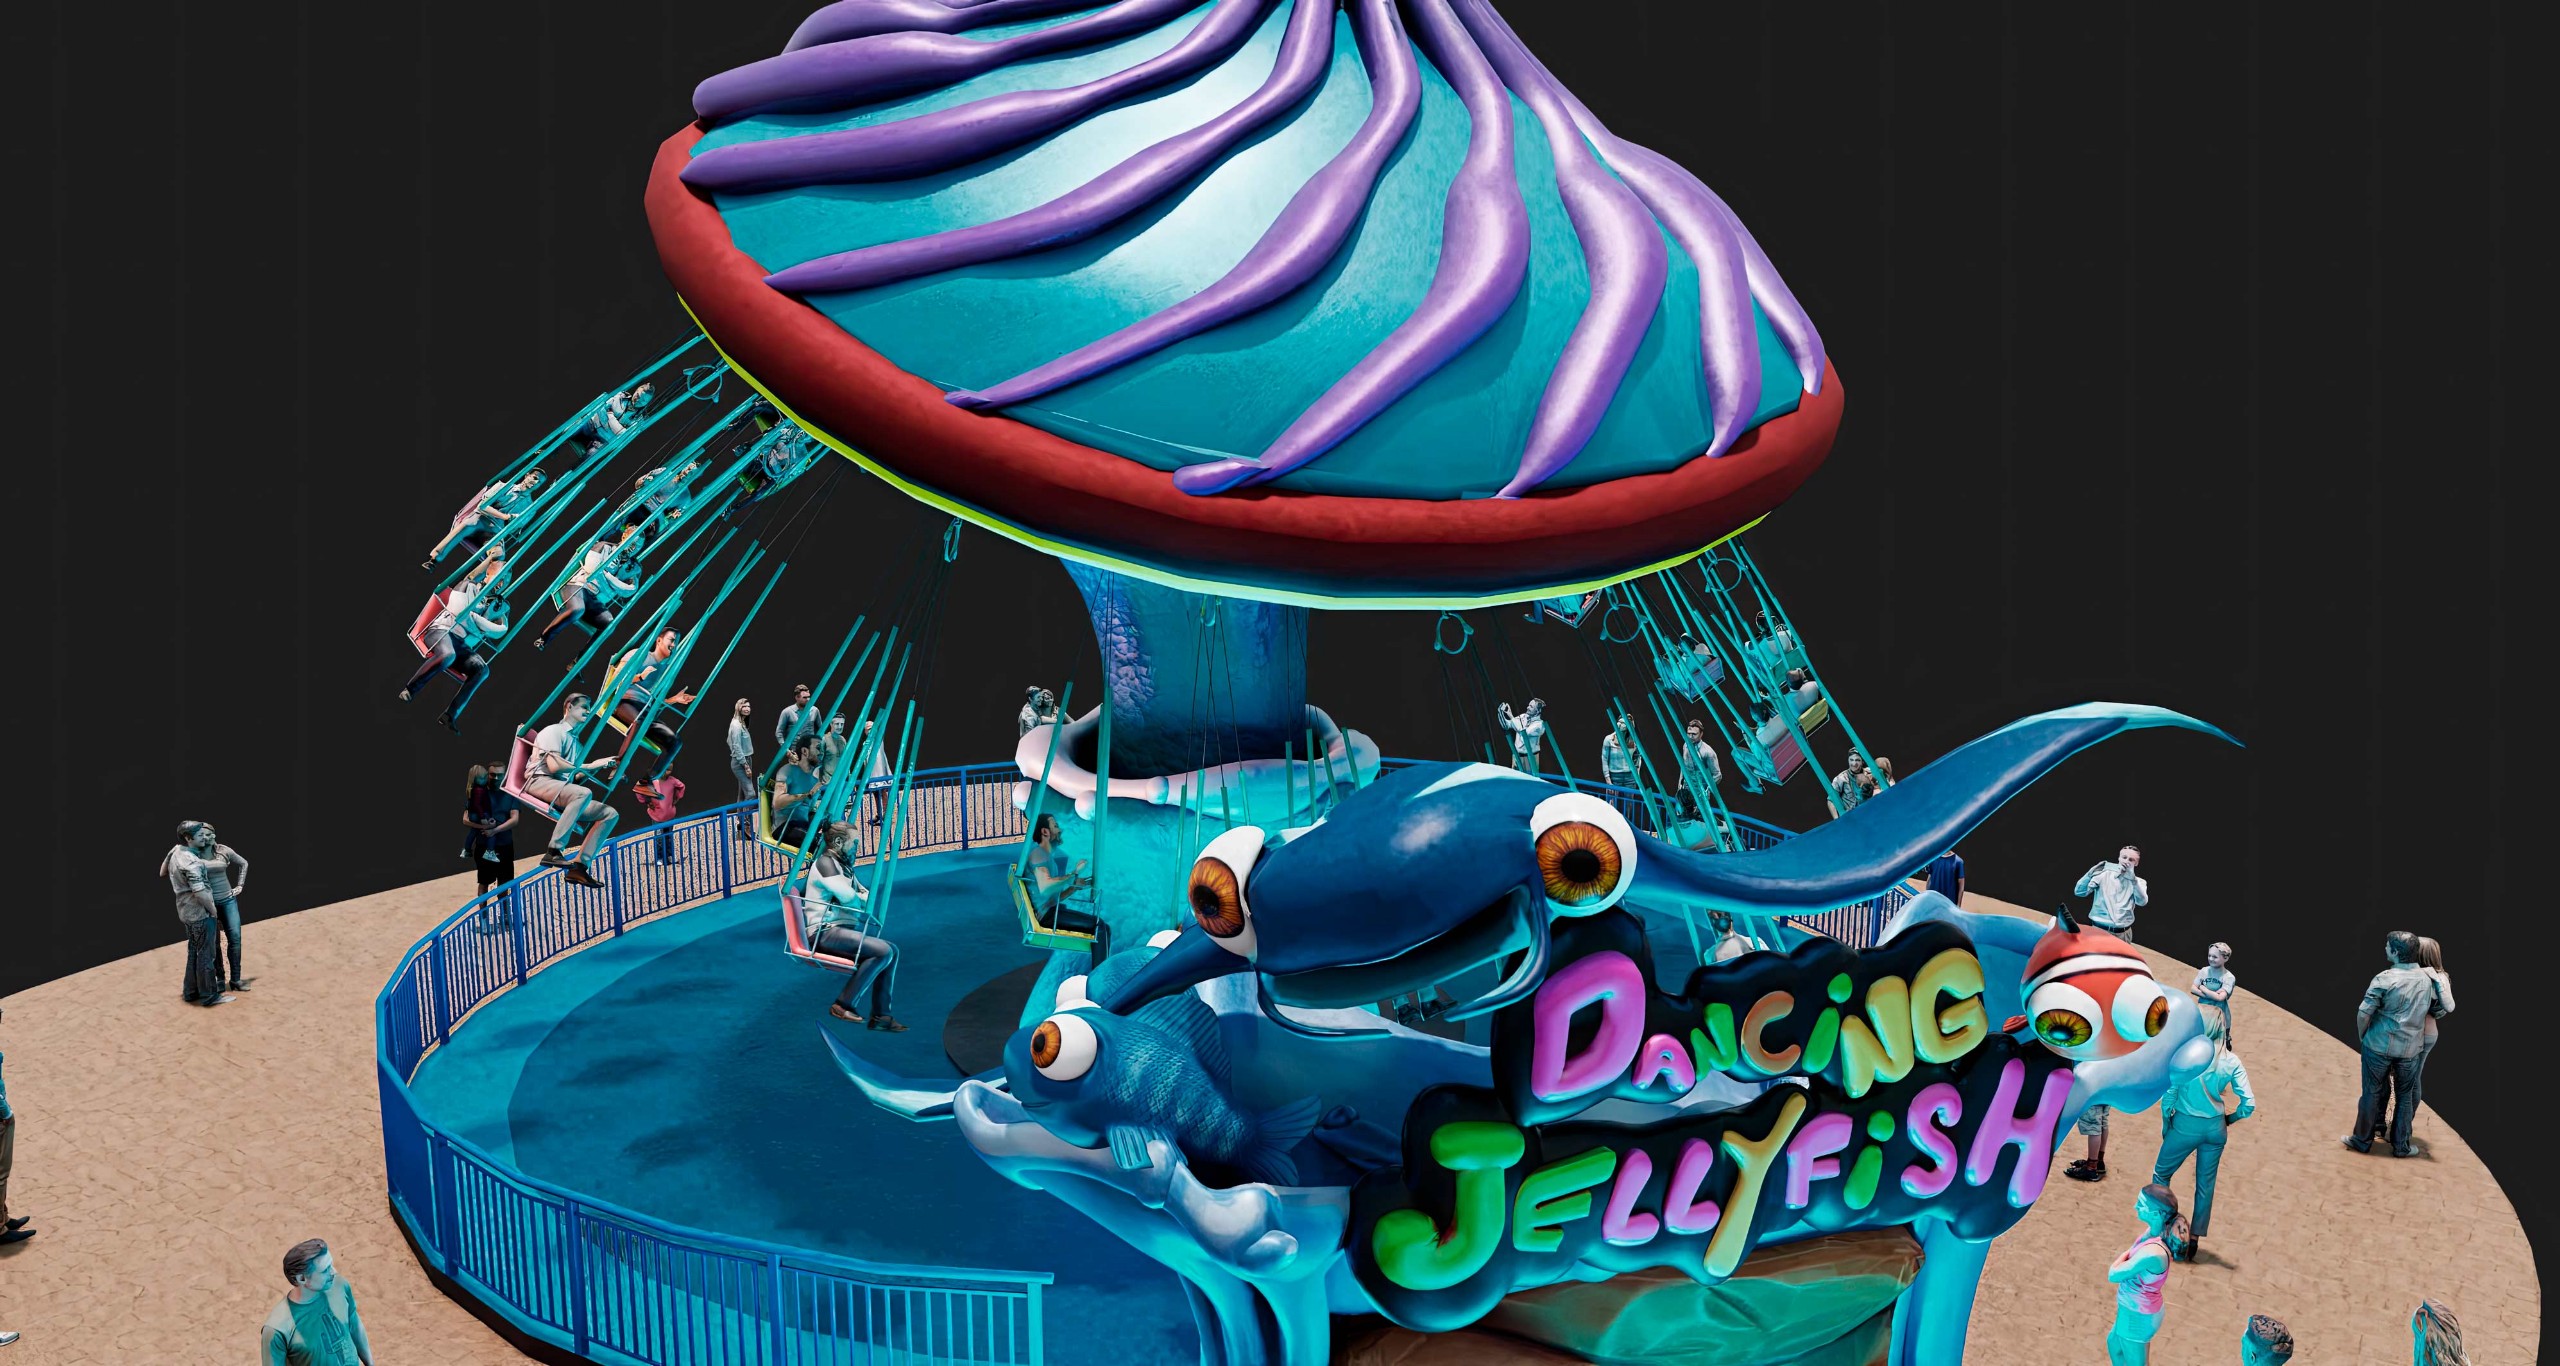  Swing ride dancing jellyfish,flying chair attraction